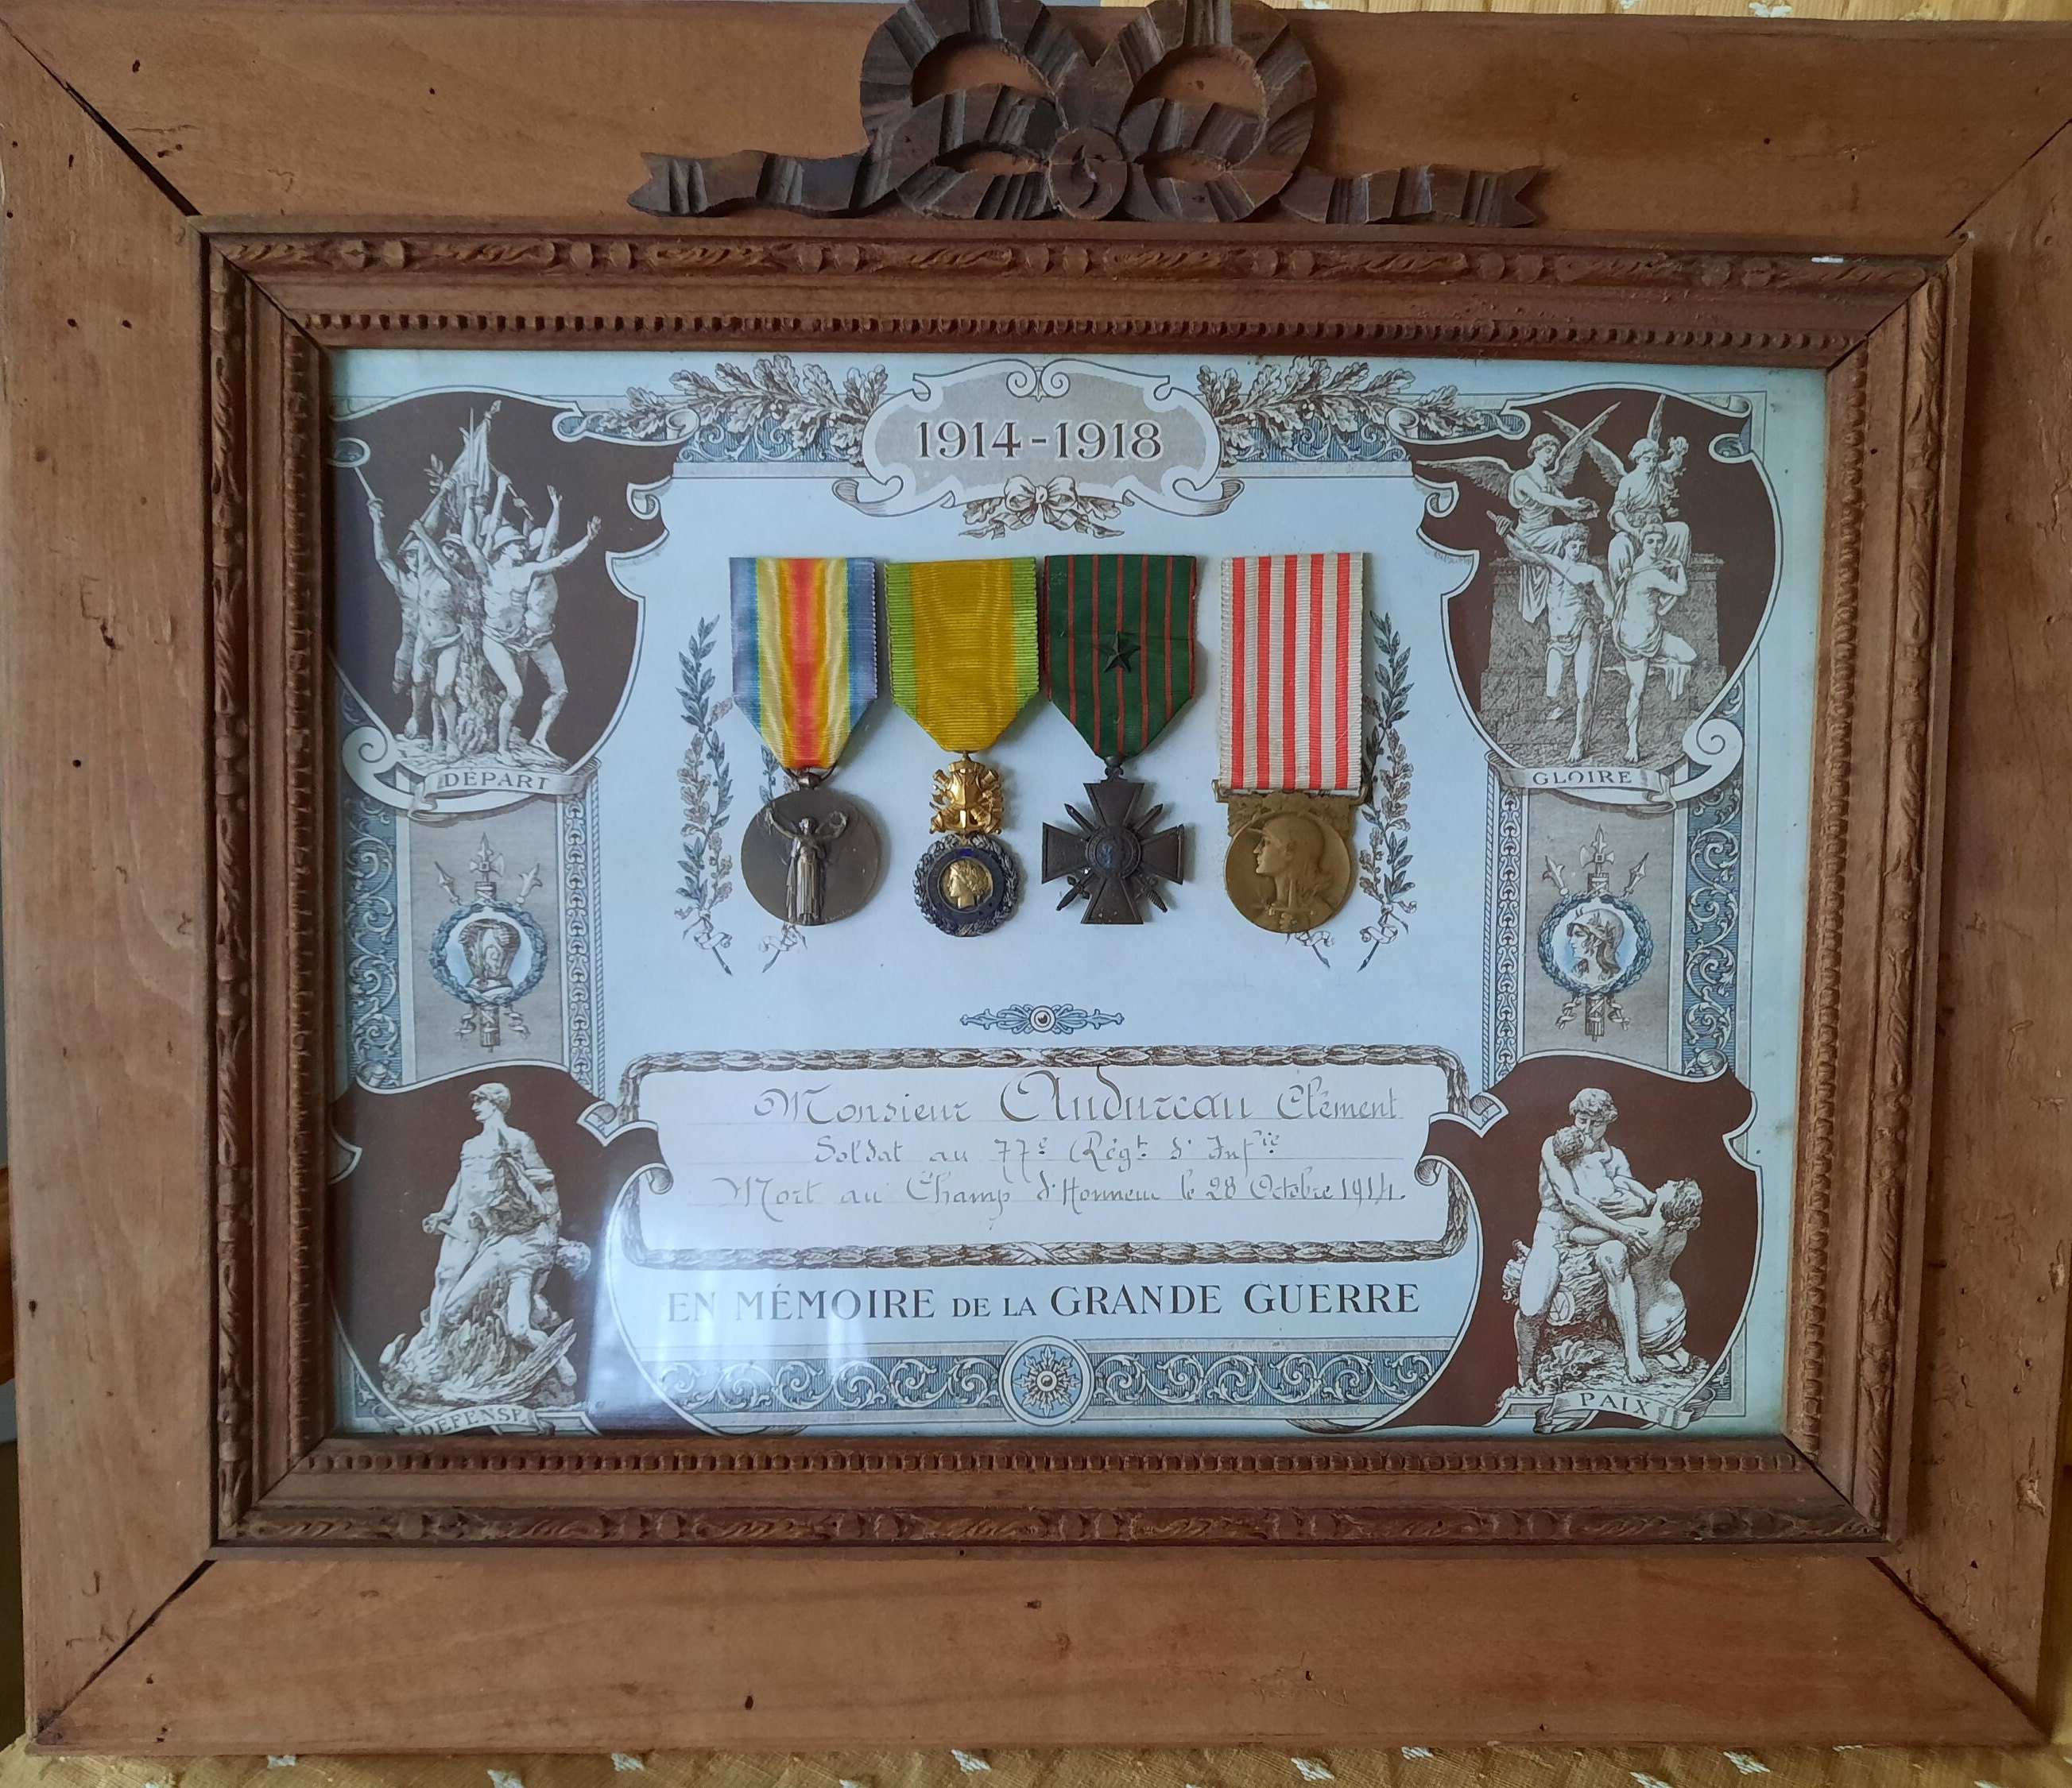 Patch Board / Military Shadow Box